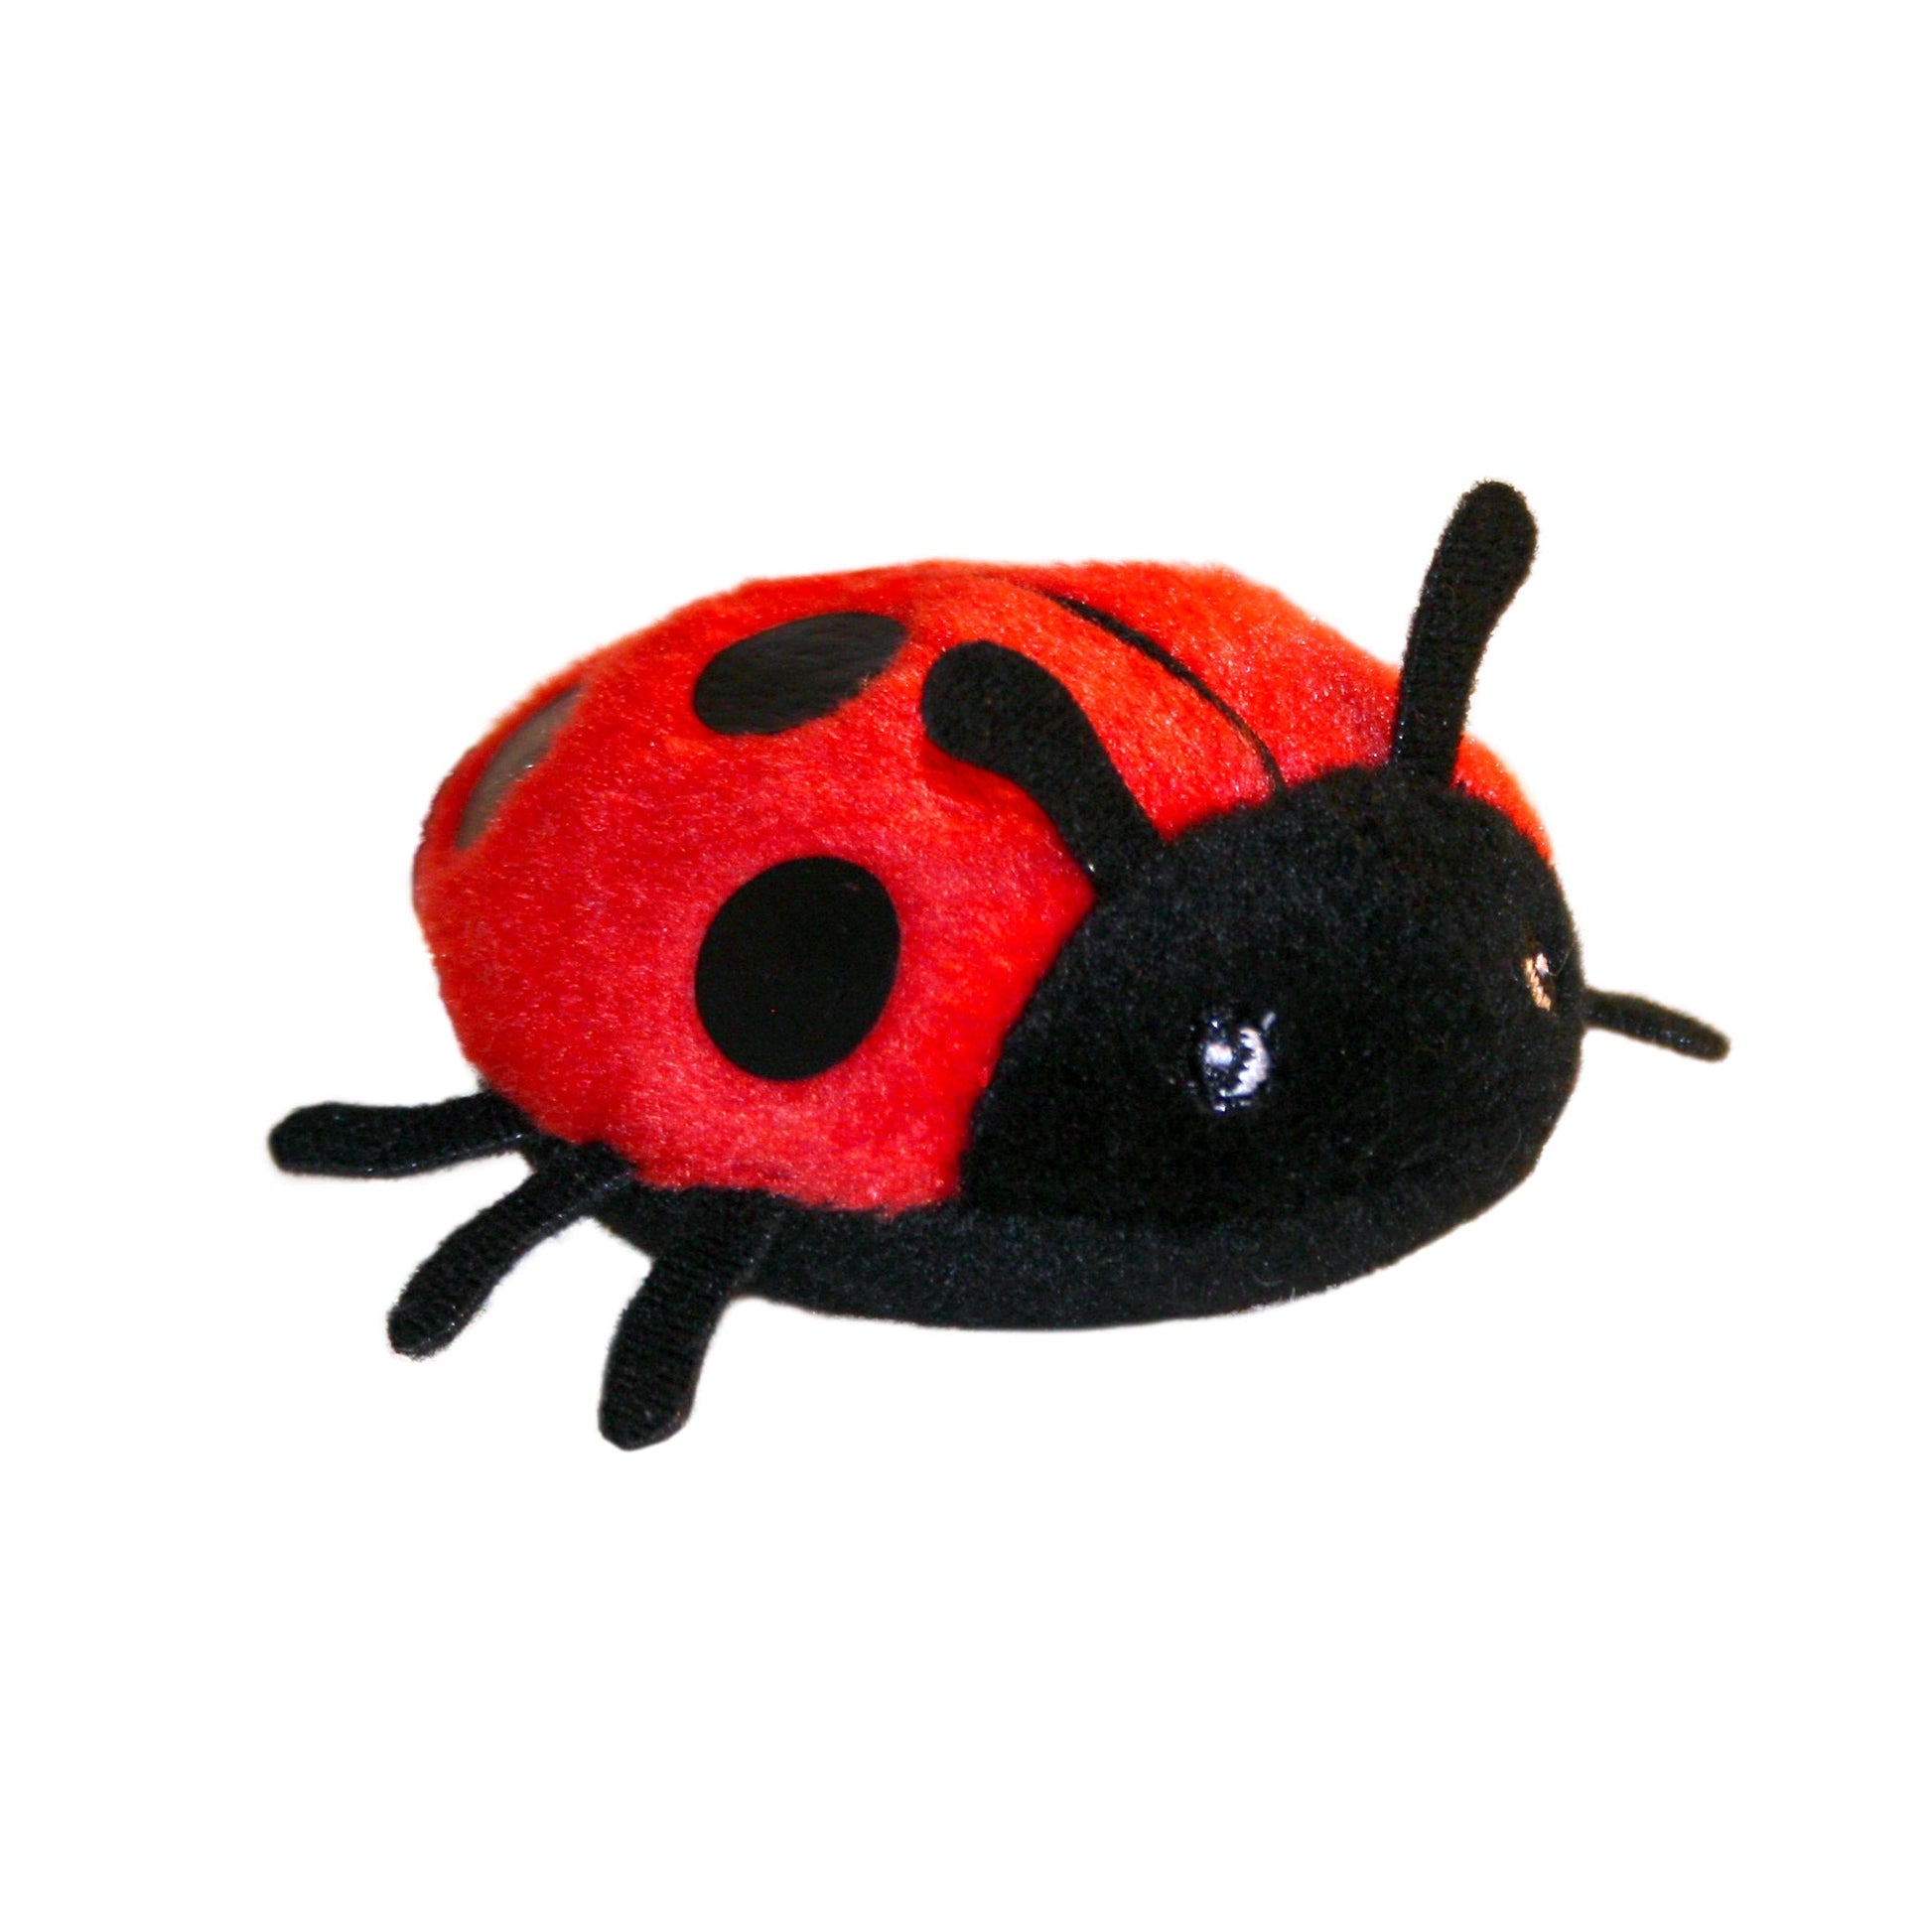 Ladybird Finger Puppet - The Puppet Company - The Forgotten Toy Shop